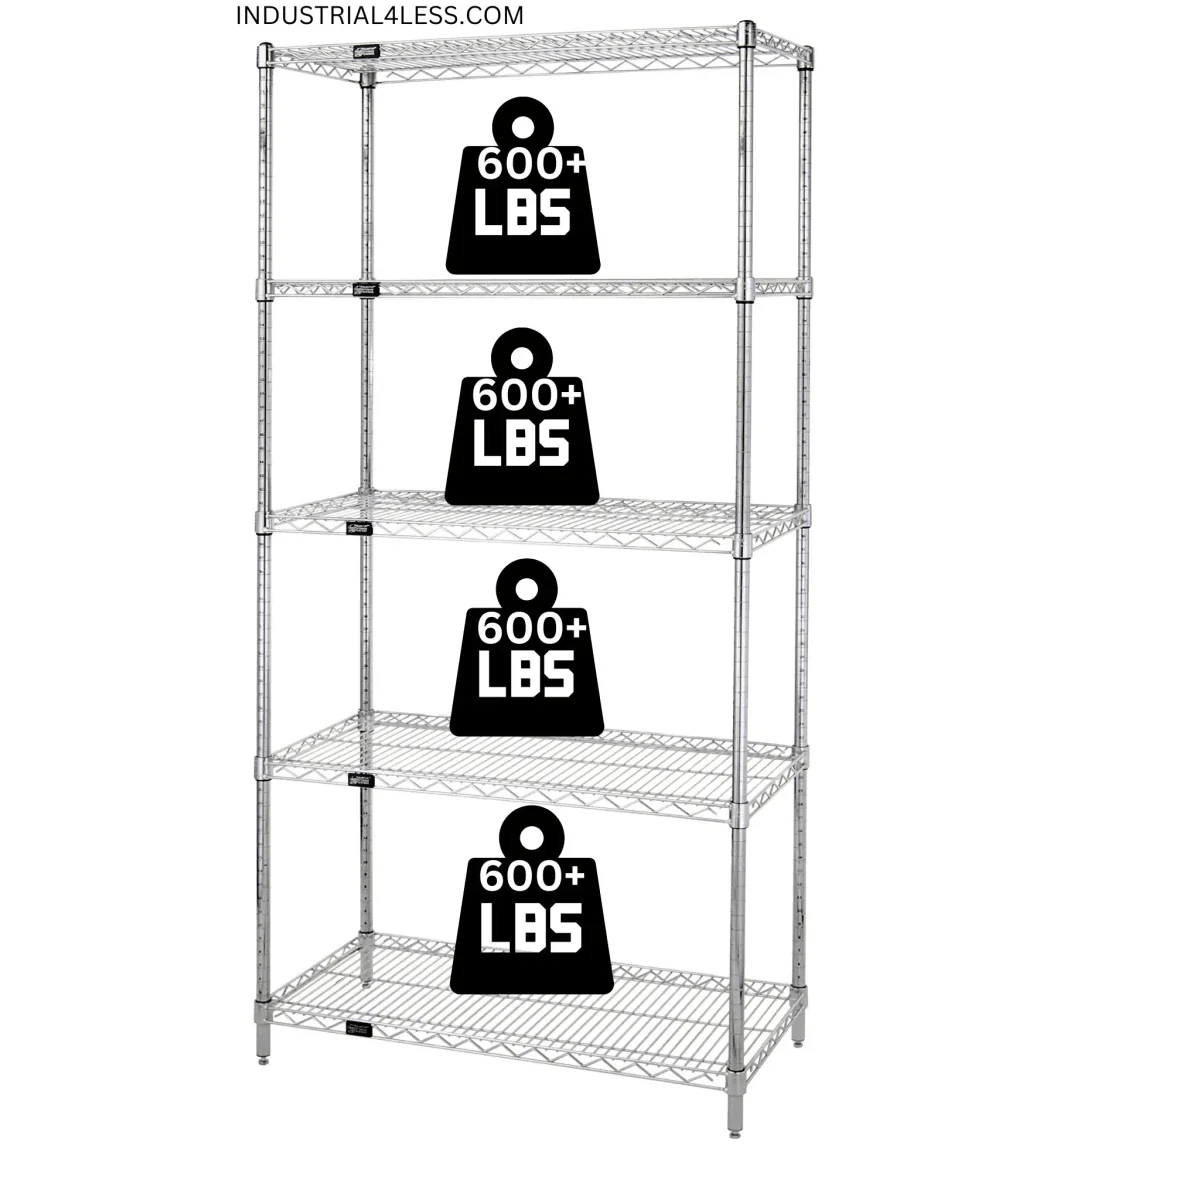 21" x 60" Stainless Steel Wire Shelving Unit - Industrial 4 Less - 21605S-5